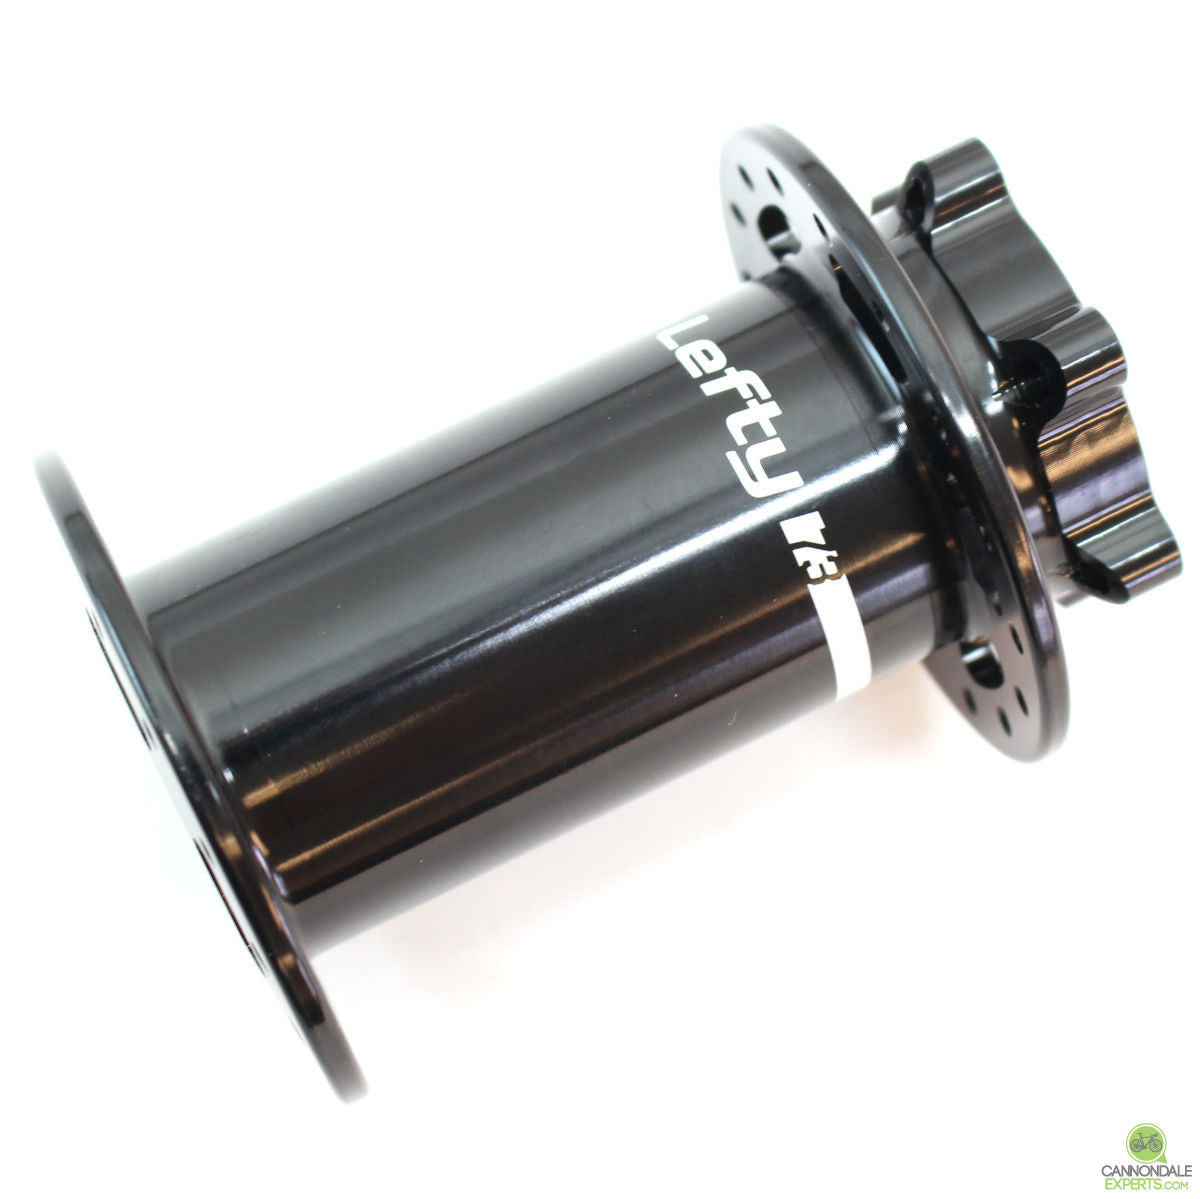 Lefty 73 Front Hubs | CannondaleExperts.com